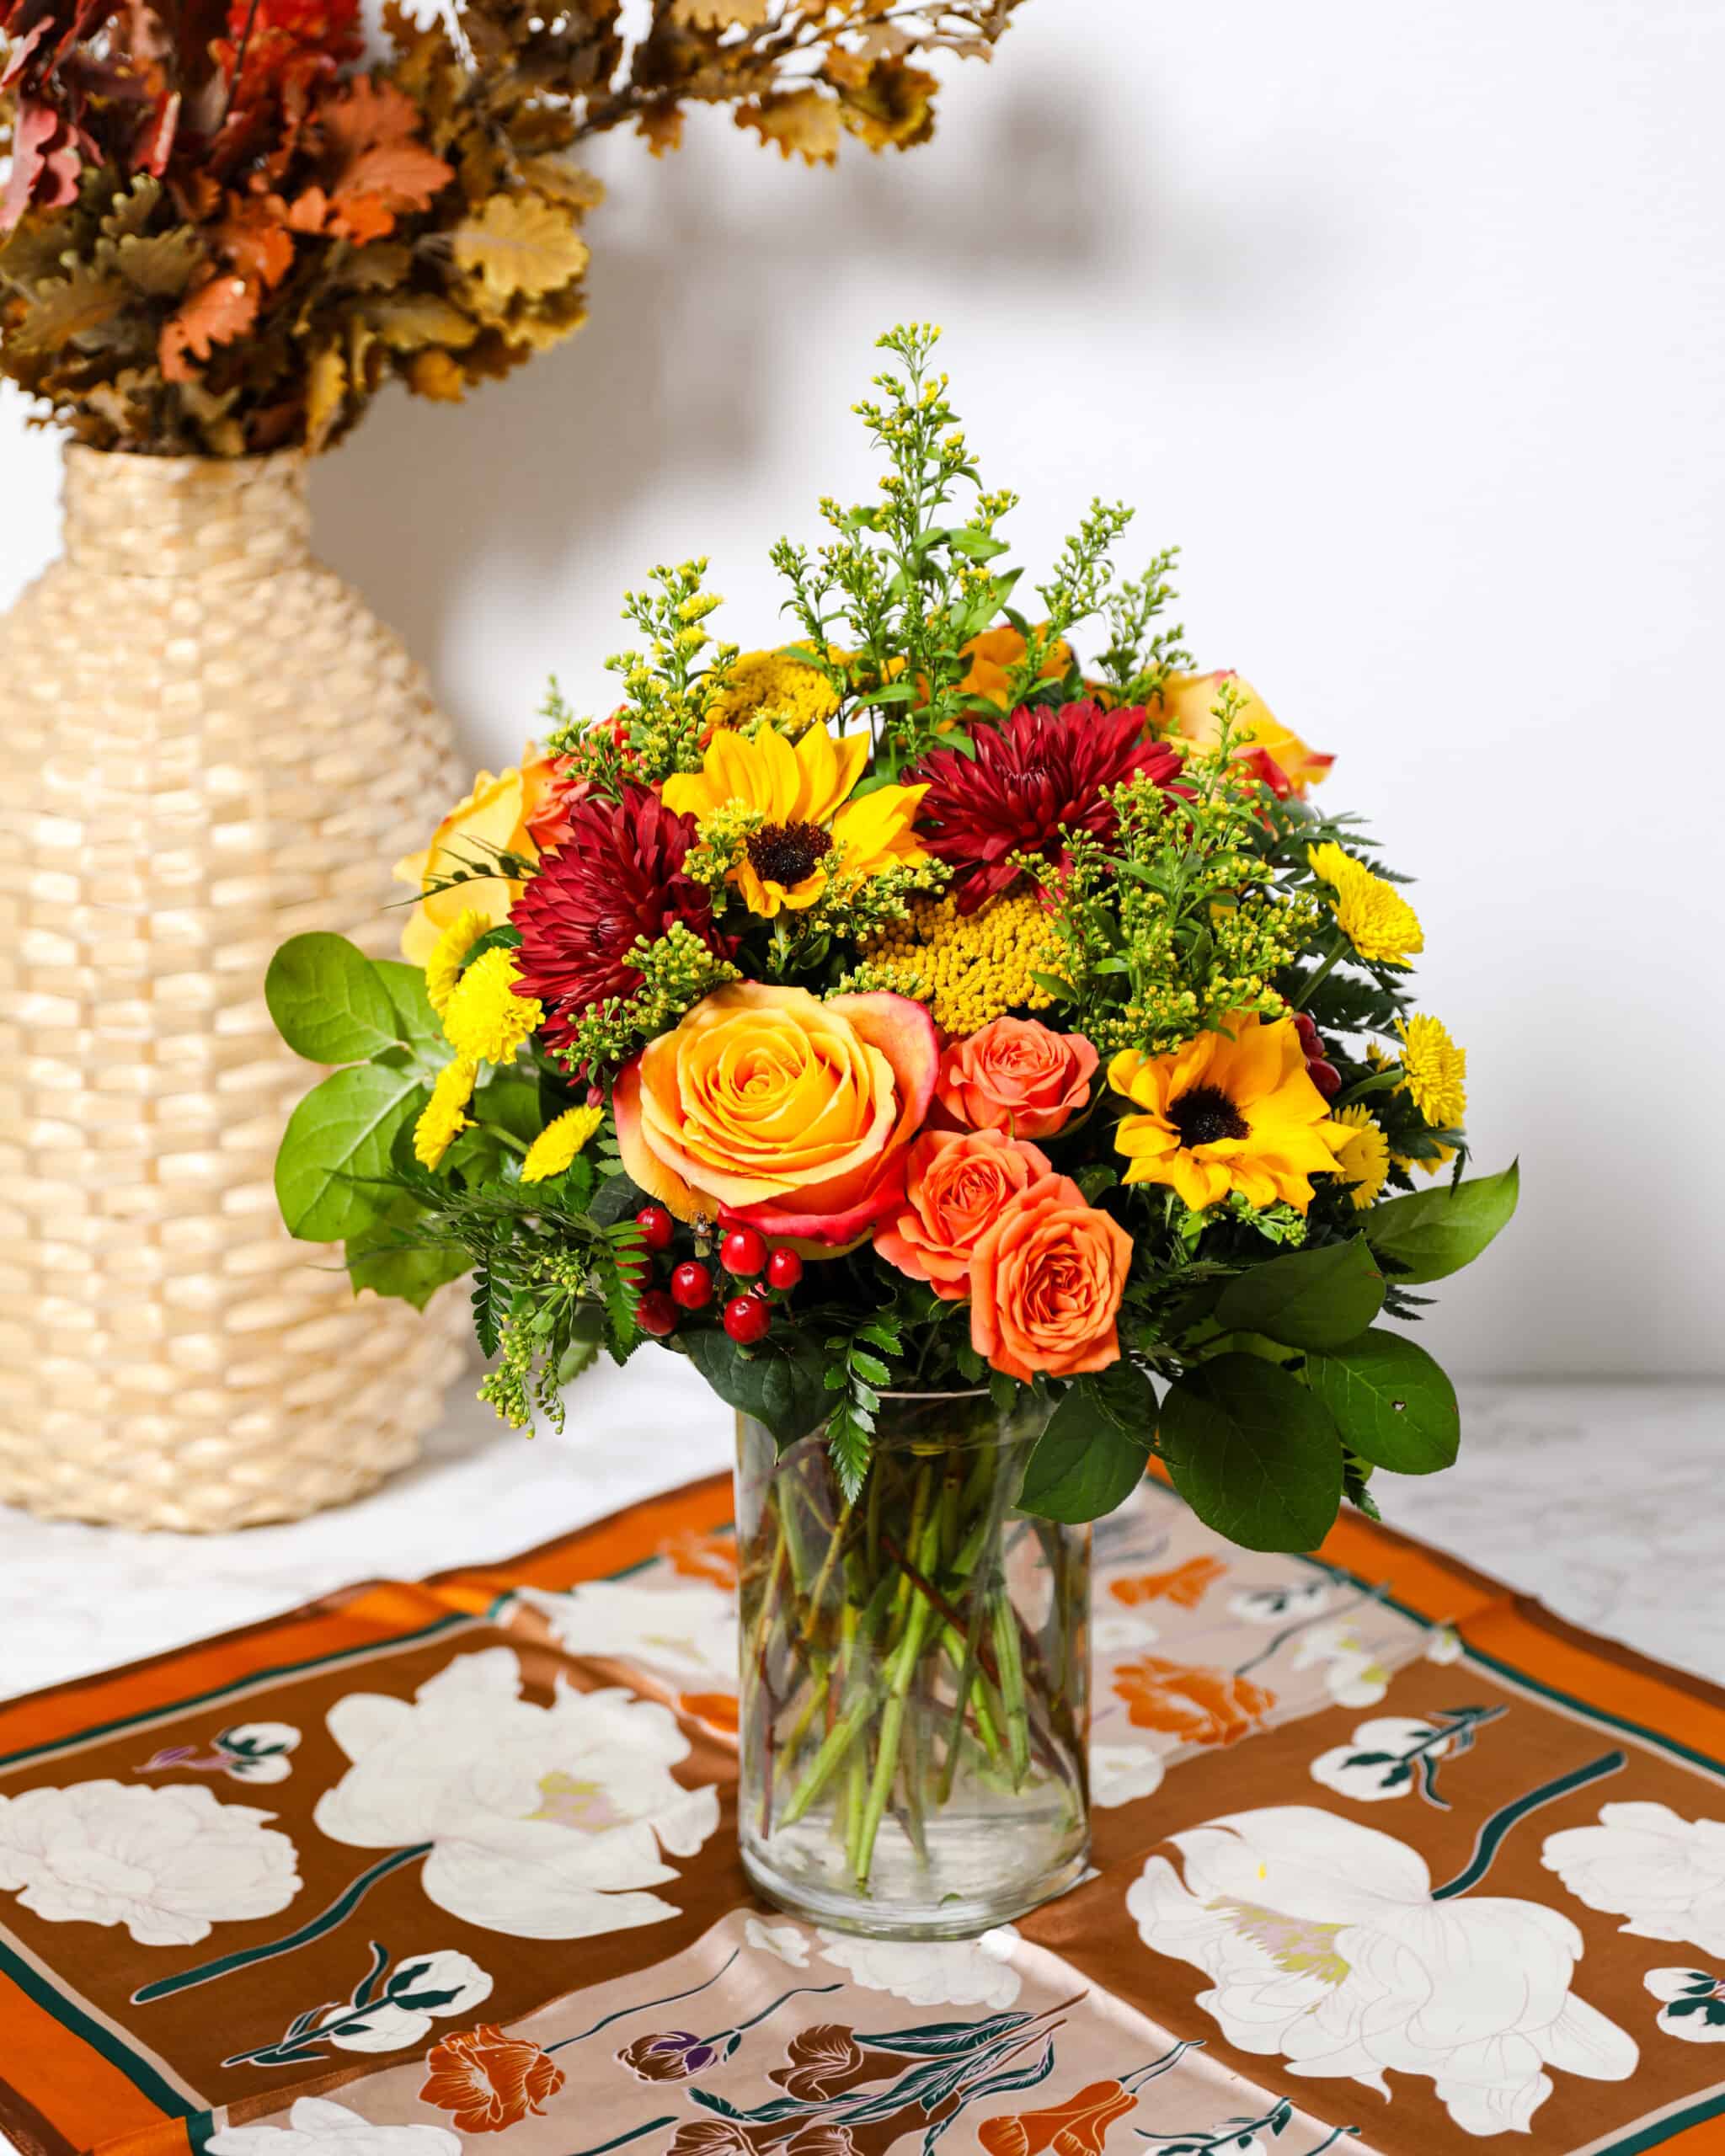 Falling Autumn - orange, yellow and red flowers and greenery in a glass vase